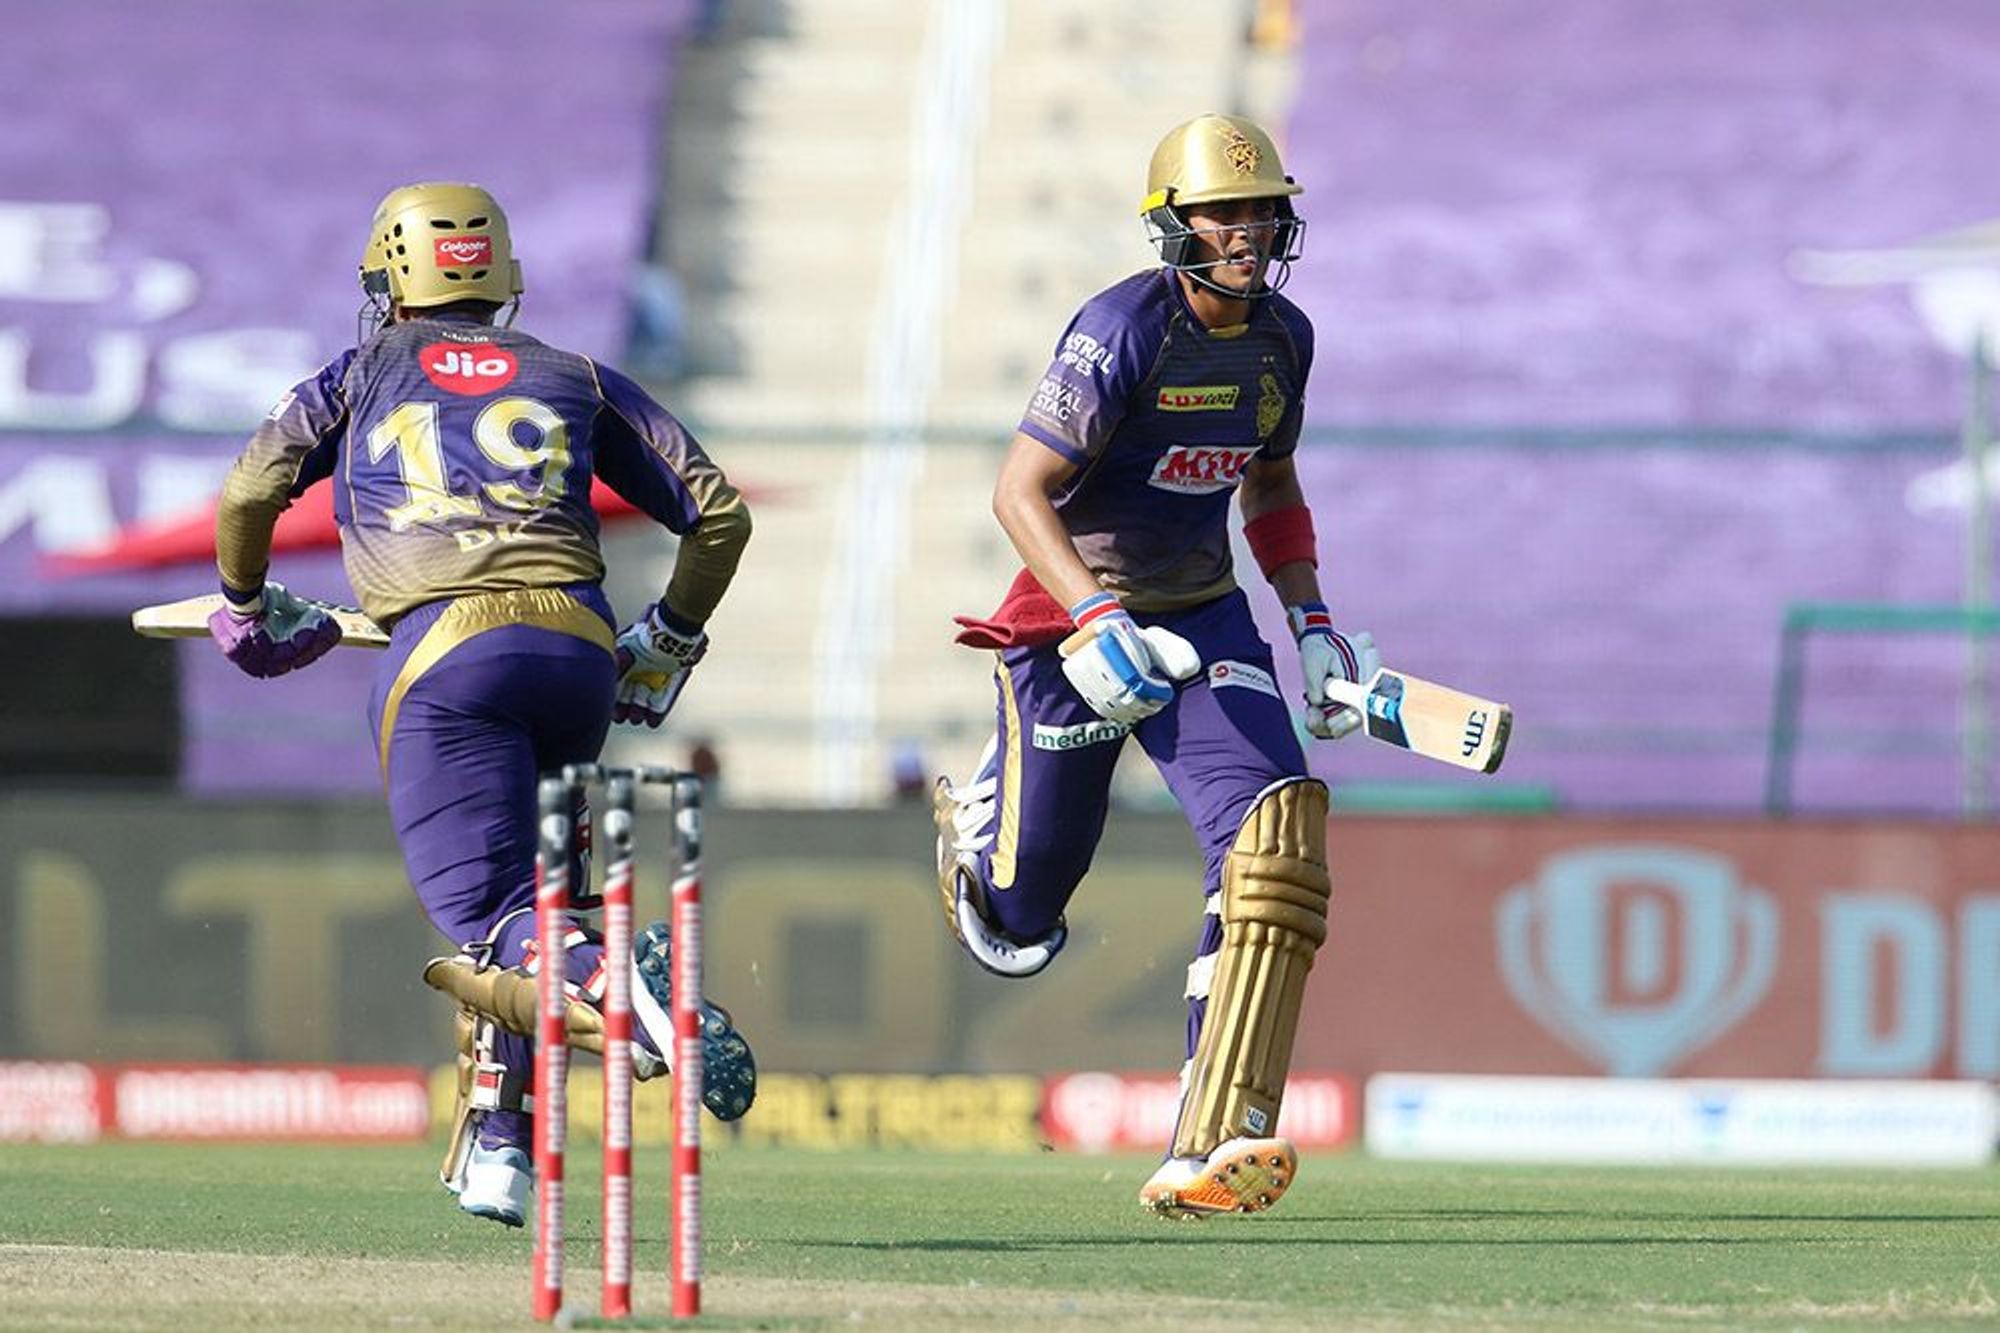 IPL 2020 | Today I Learnt: KKR vs KXIP - The Mujeeb conundrum and Shubman Gill’s gear-switch